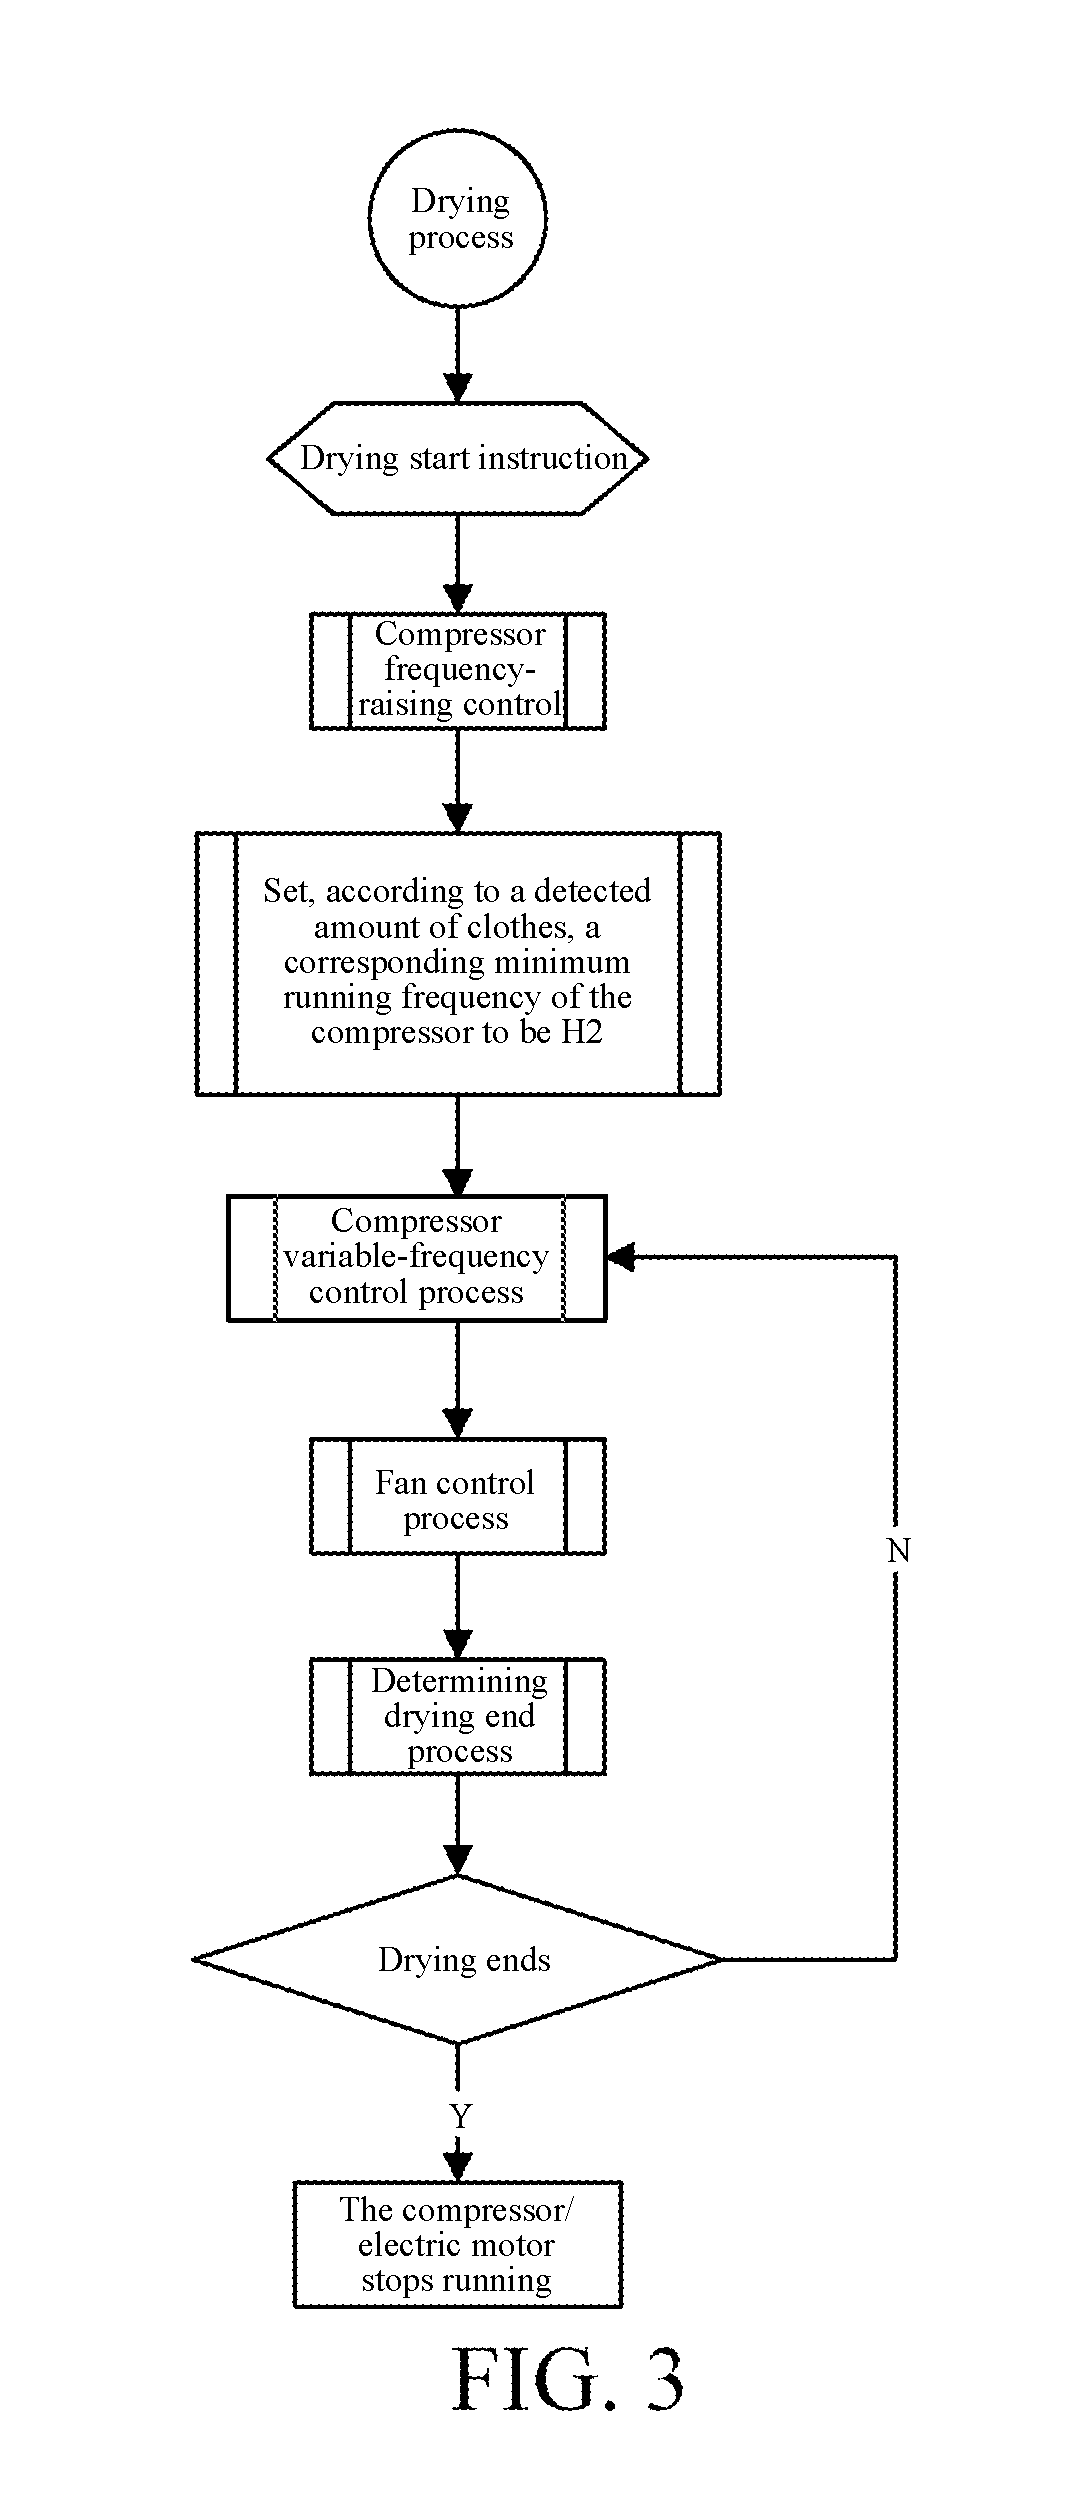 Control method for laundry dryer